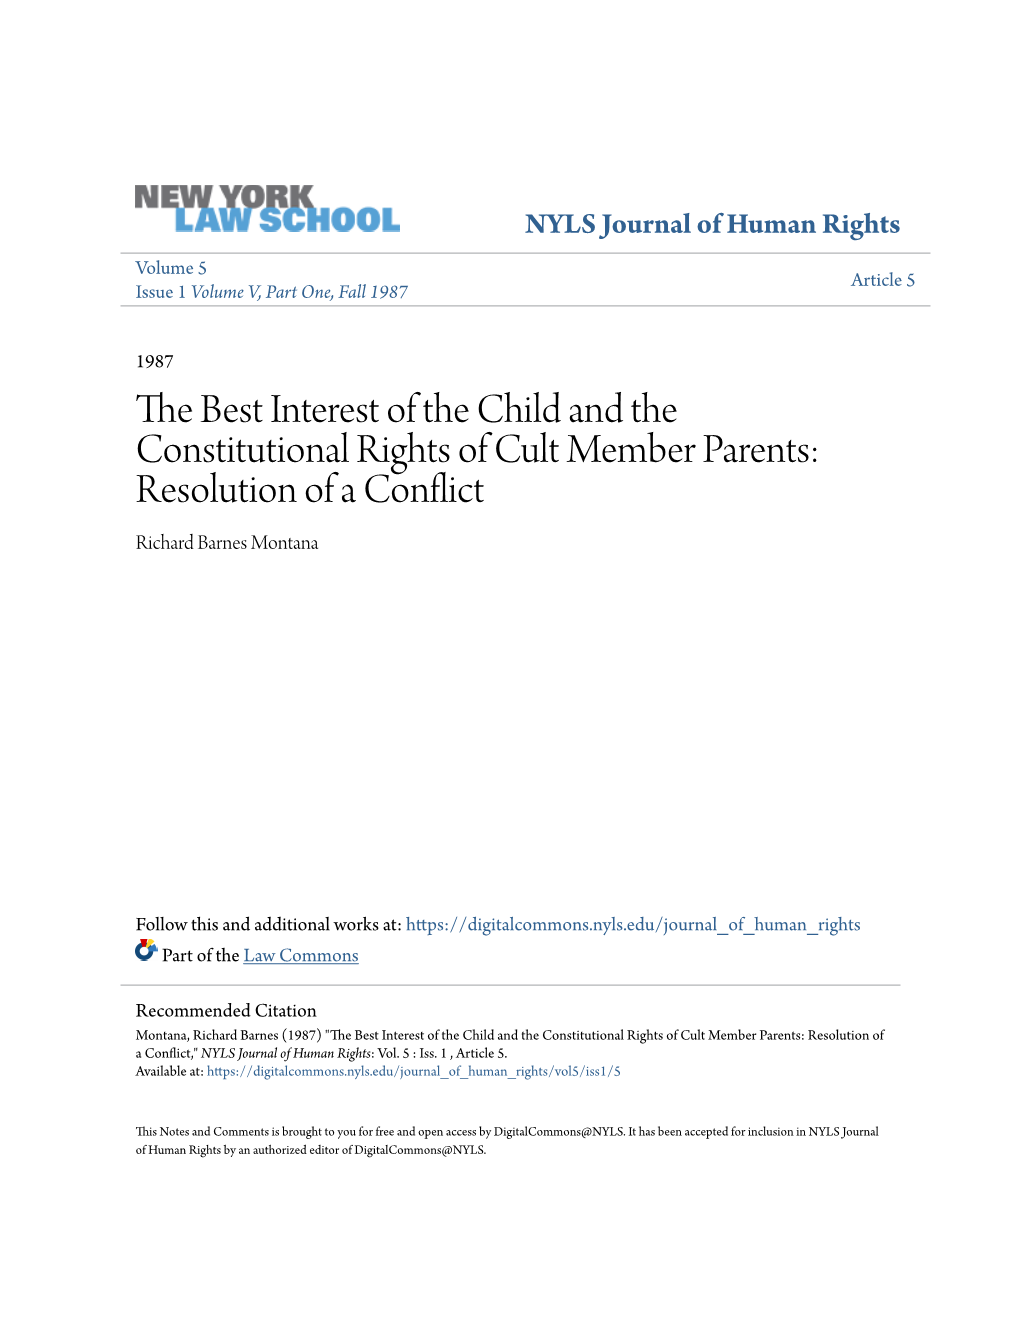 The Best Interest of the Child and the Constitutional Rights of Cult Member Parents: Resolution of a Conflict Richard Barnes Montana